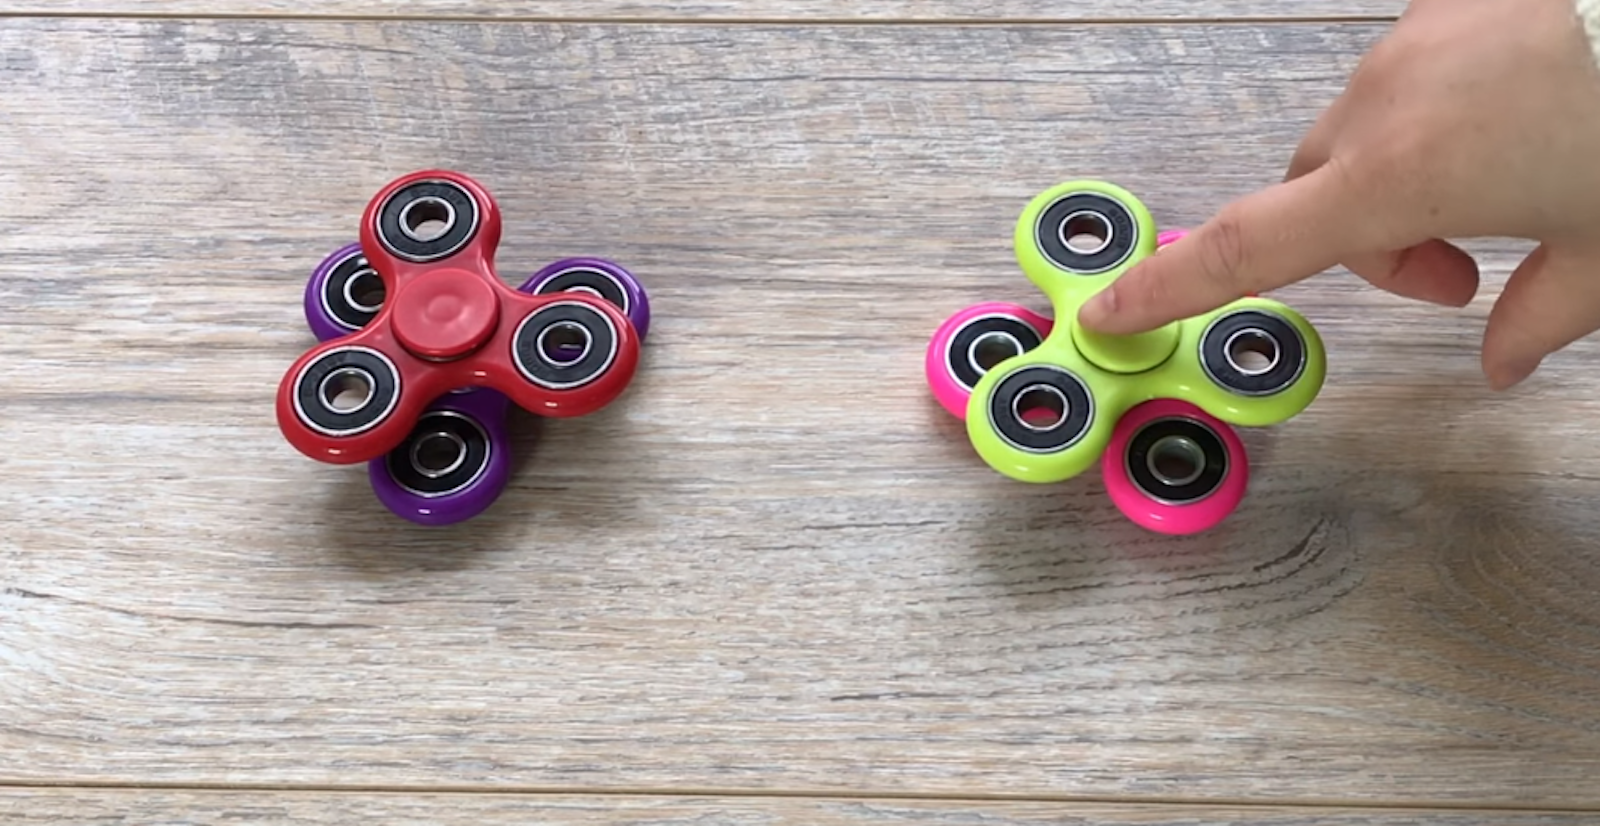 How to Make a Fidget Spinner: 2 Cool Ways